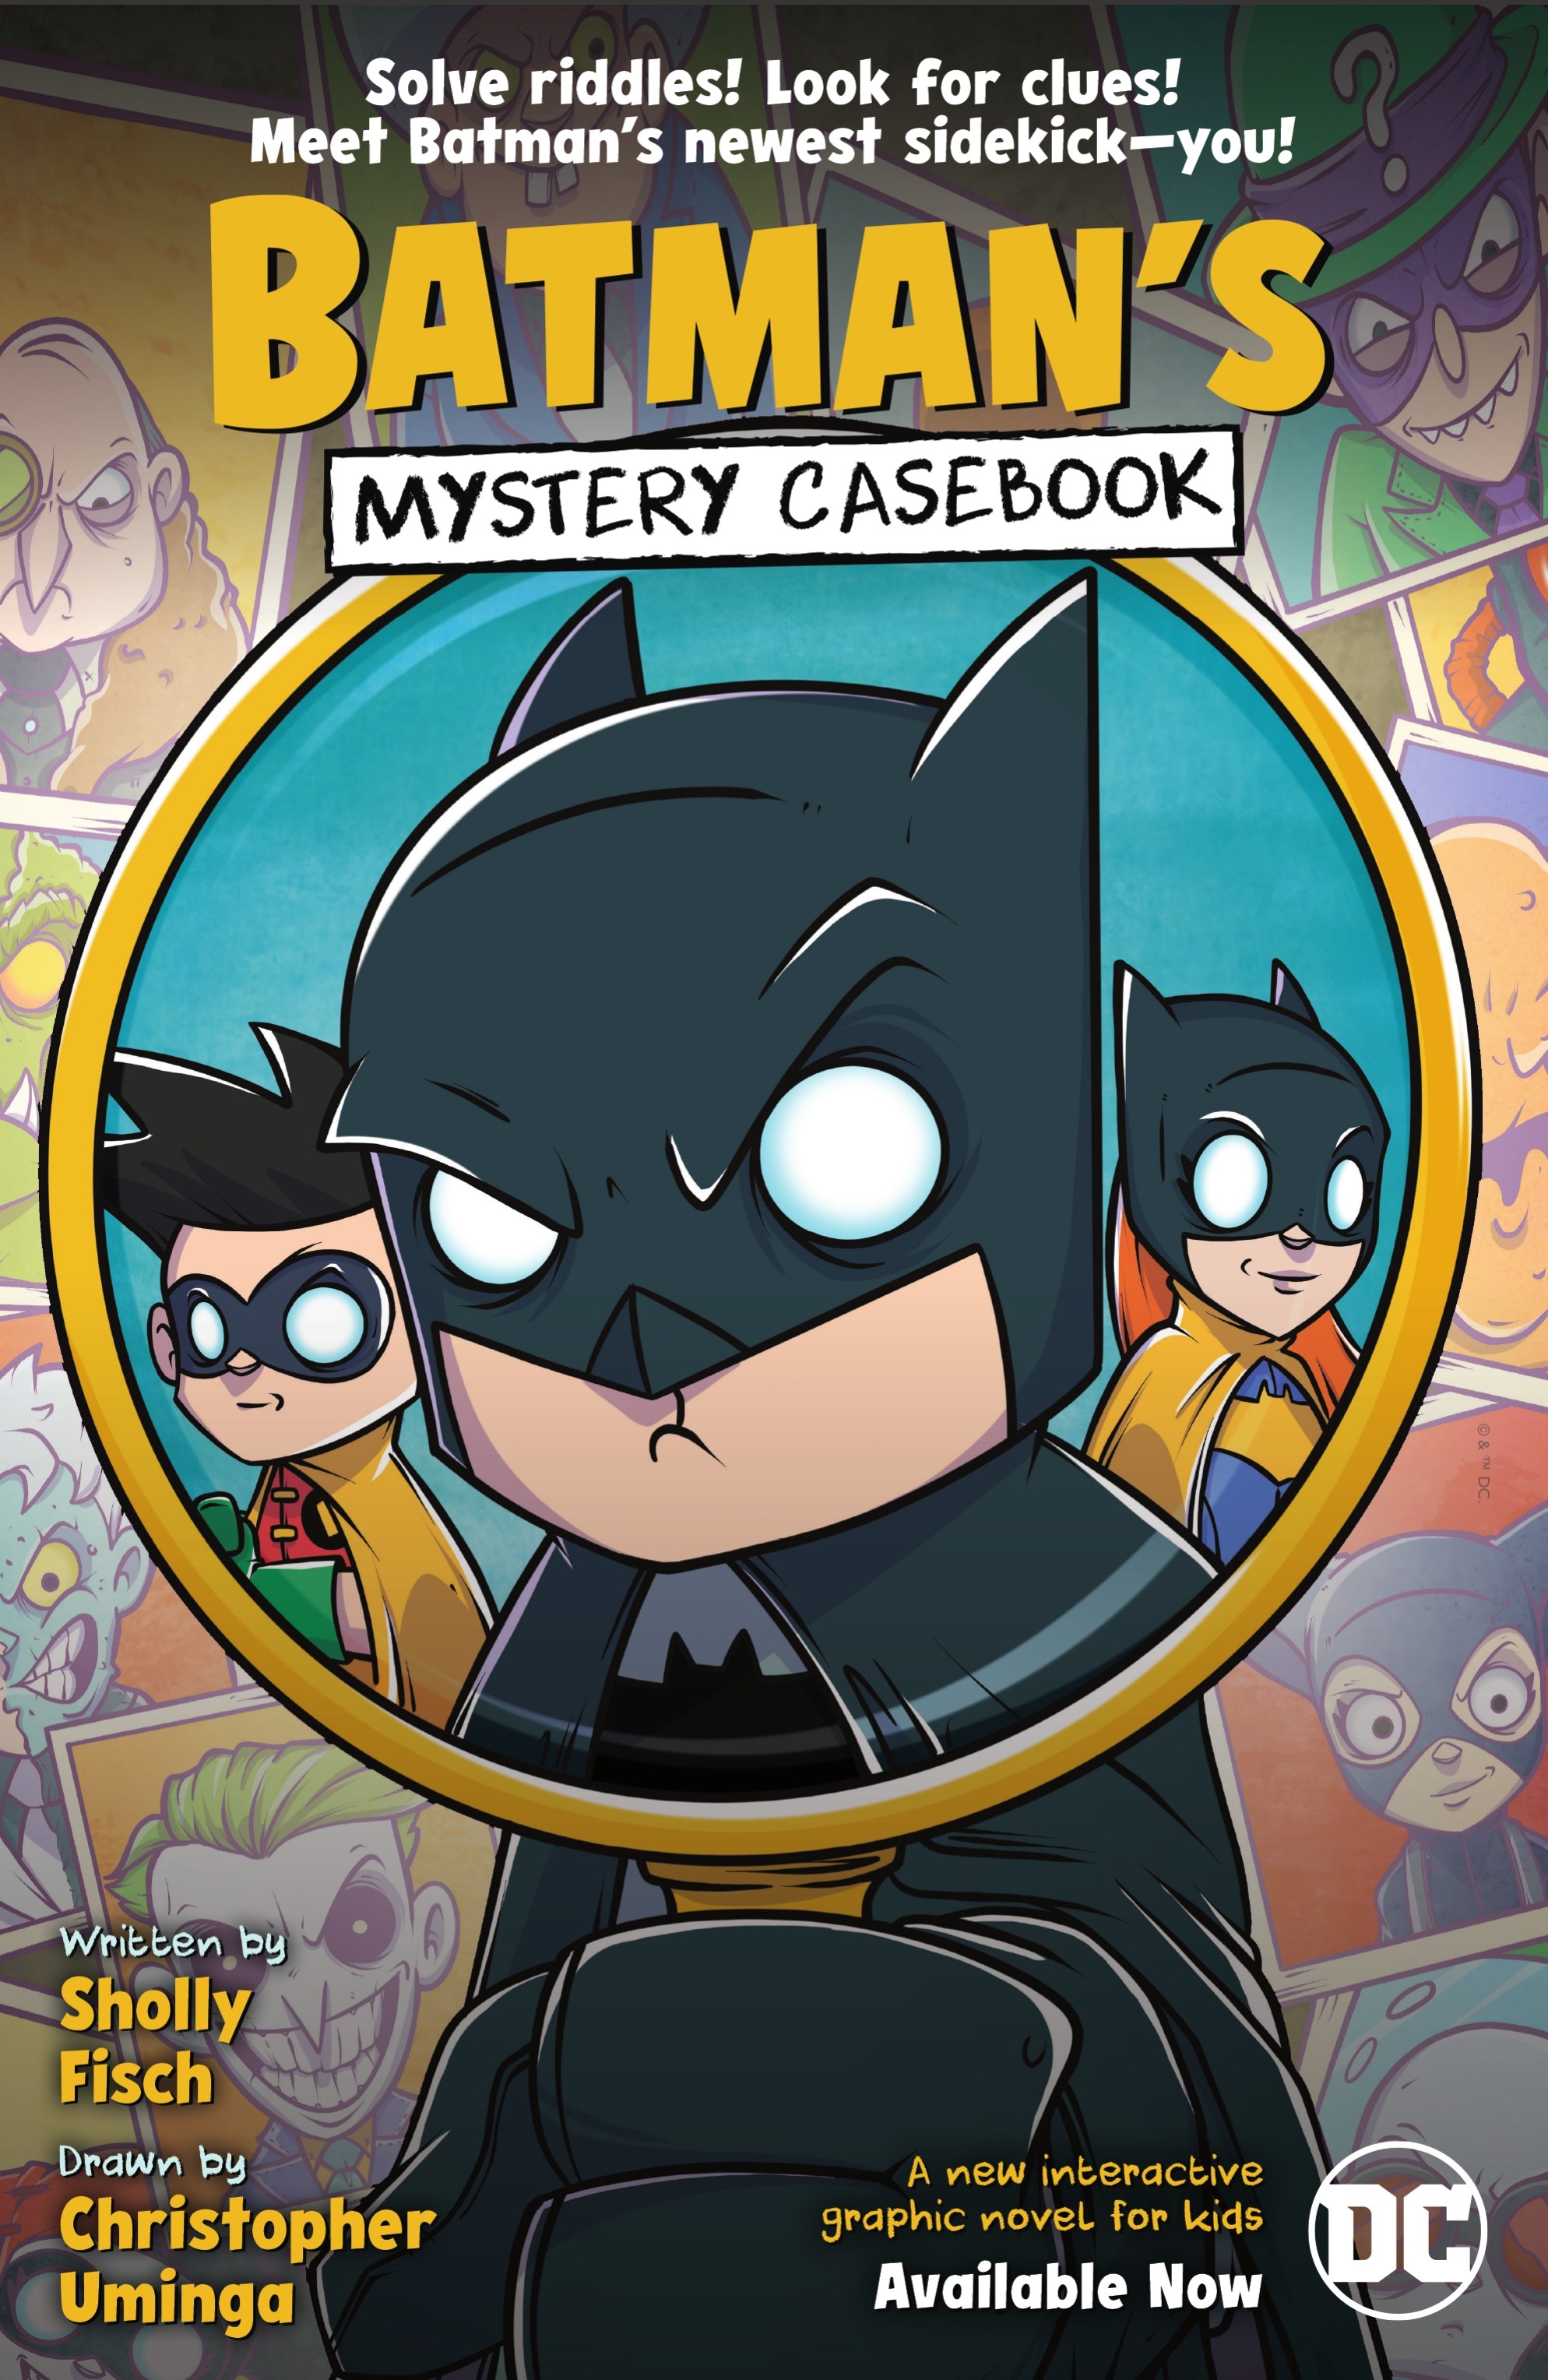 Batman's Mystery Casebook (2022) Chapter Batman Day Special Edition